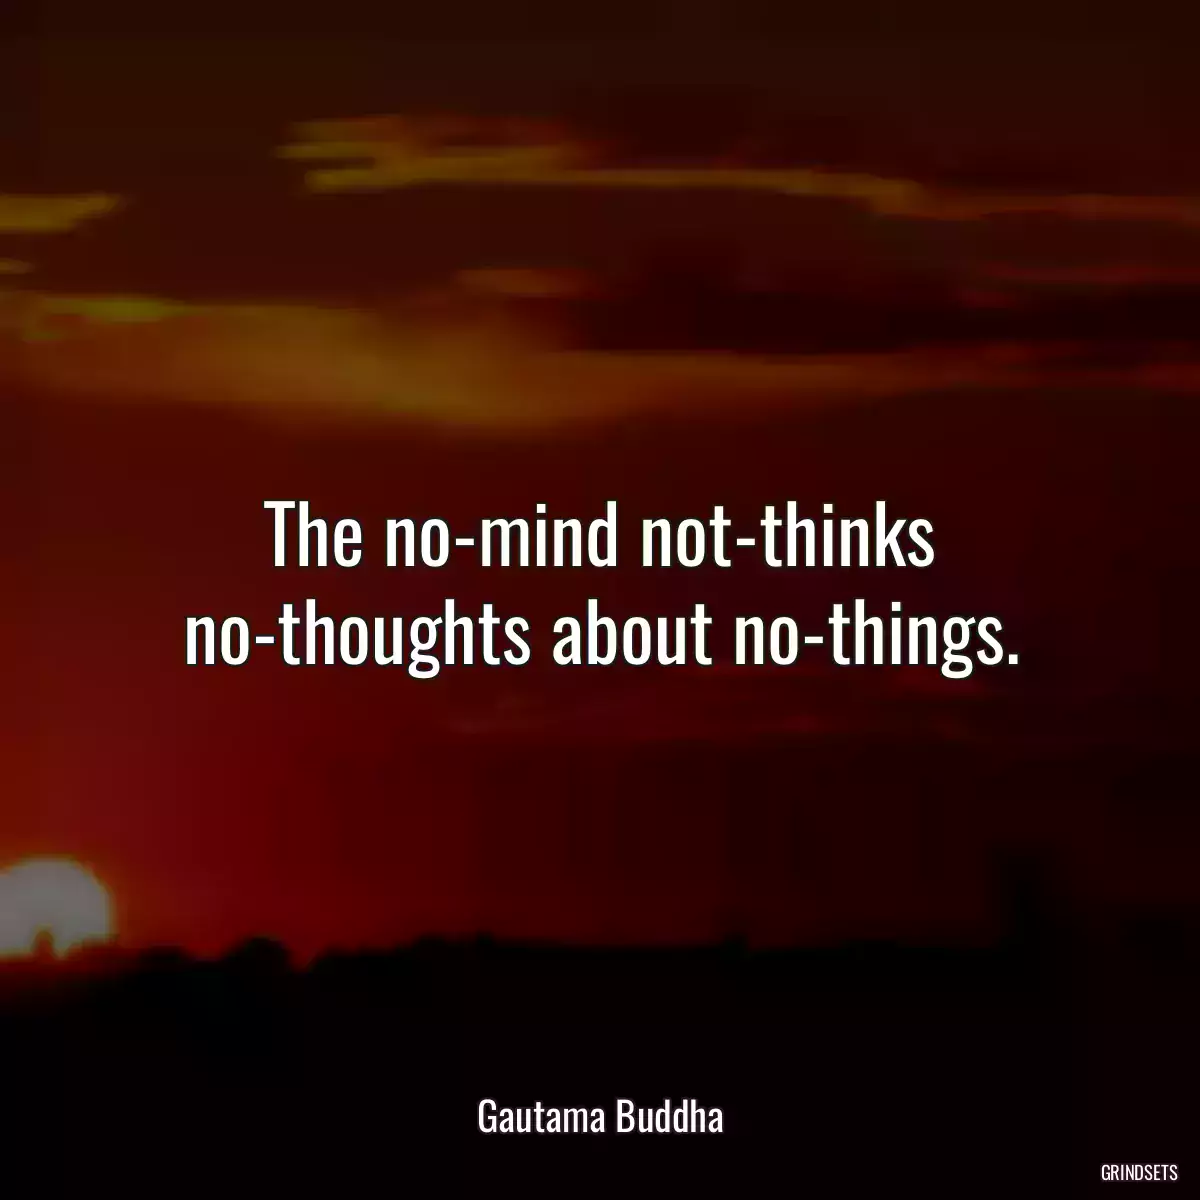 The no-mind not-thinks no-thoughts about no-things.